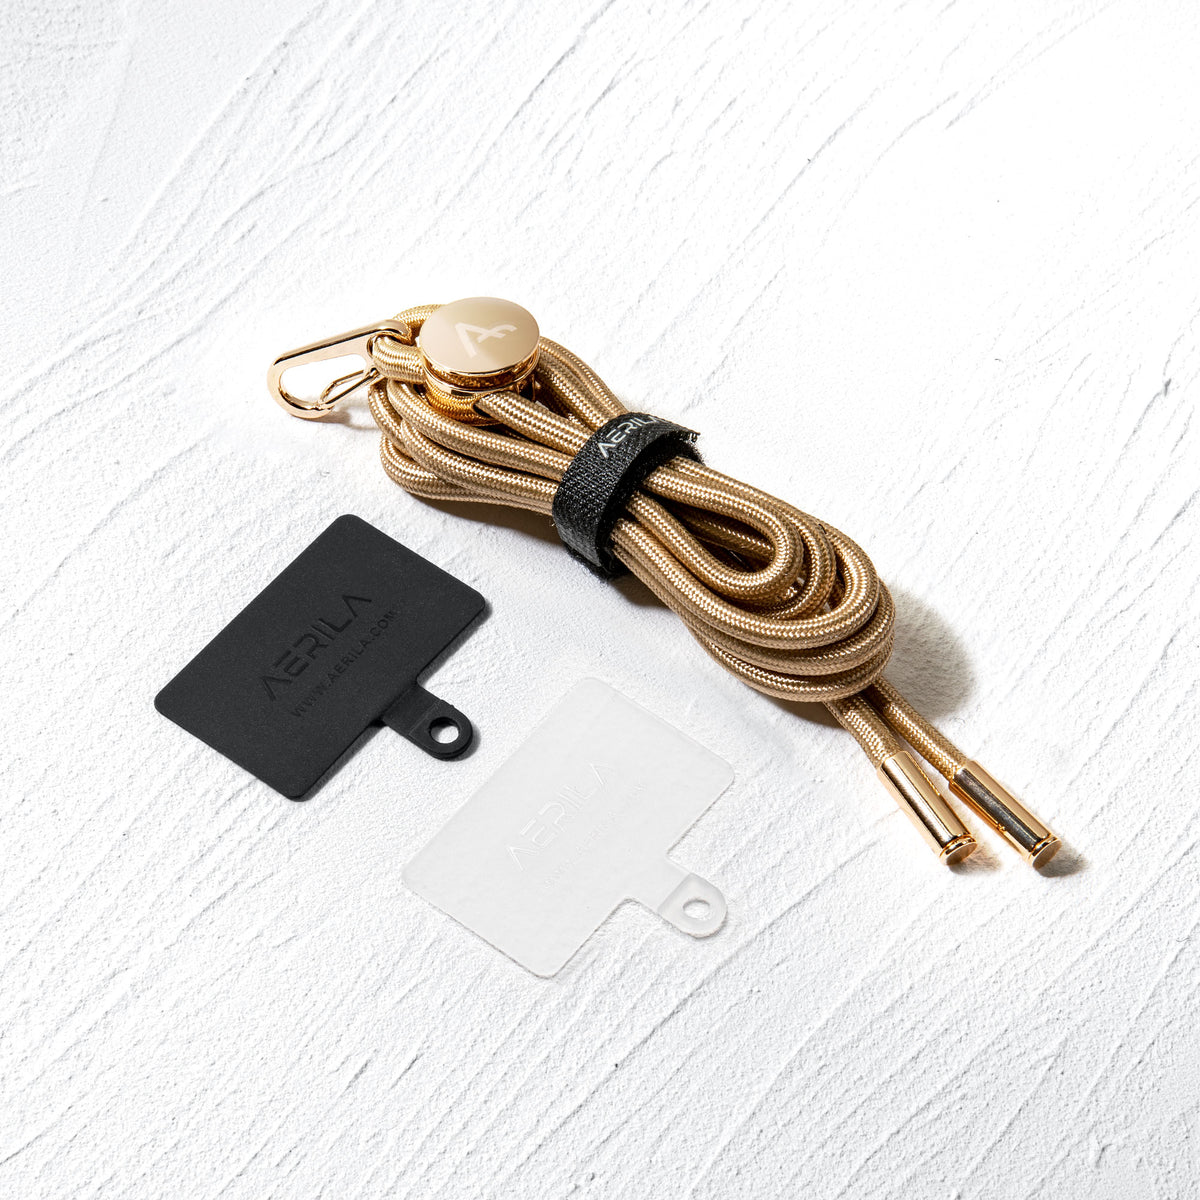 NORE Phone Lanyard set with Connector Patch Card | METALLIC Collection - AERILA